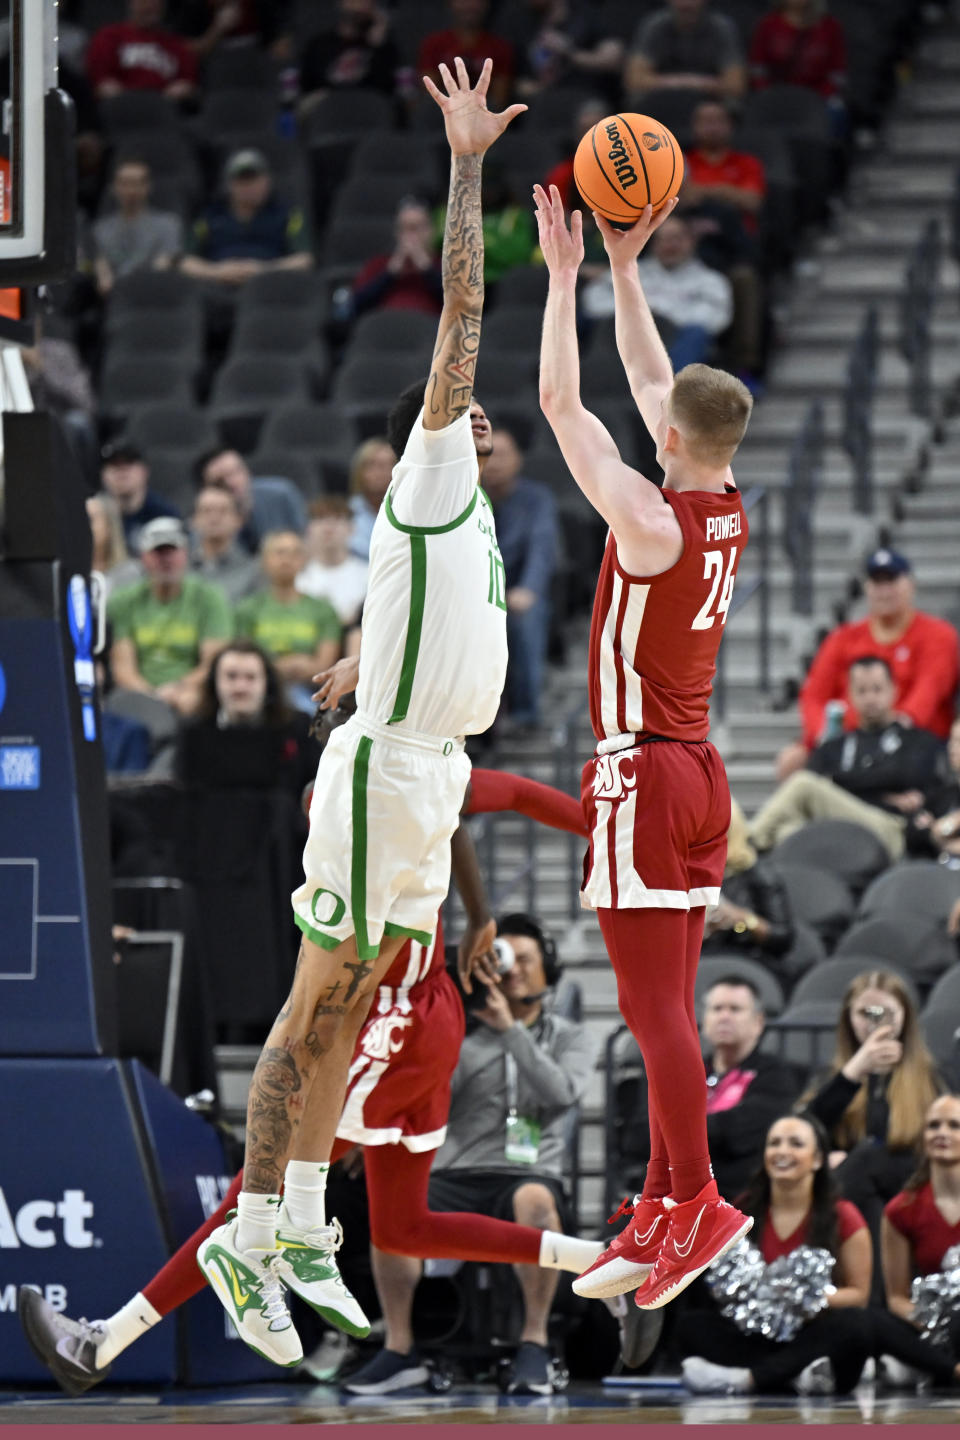 Washington State guard Justin Powell (24) shoots against Oregon center Kel'el Ware (10) during the second half of an NCAA college basketball game in the quarterfinals of the Pac-12 men's tournament Thursday, March 9, 2023, in Las Vegas. (AP Photo/David Becker)